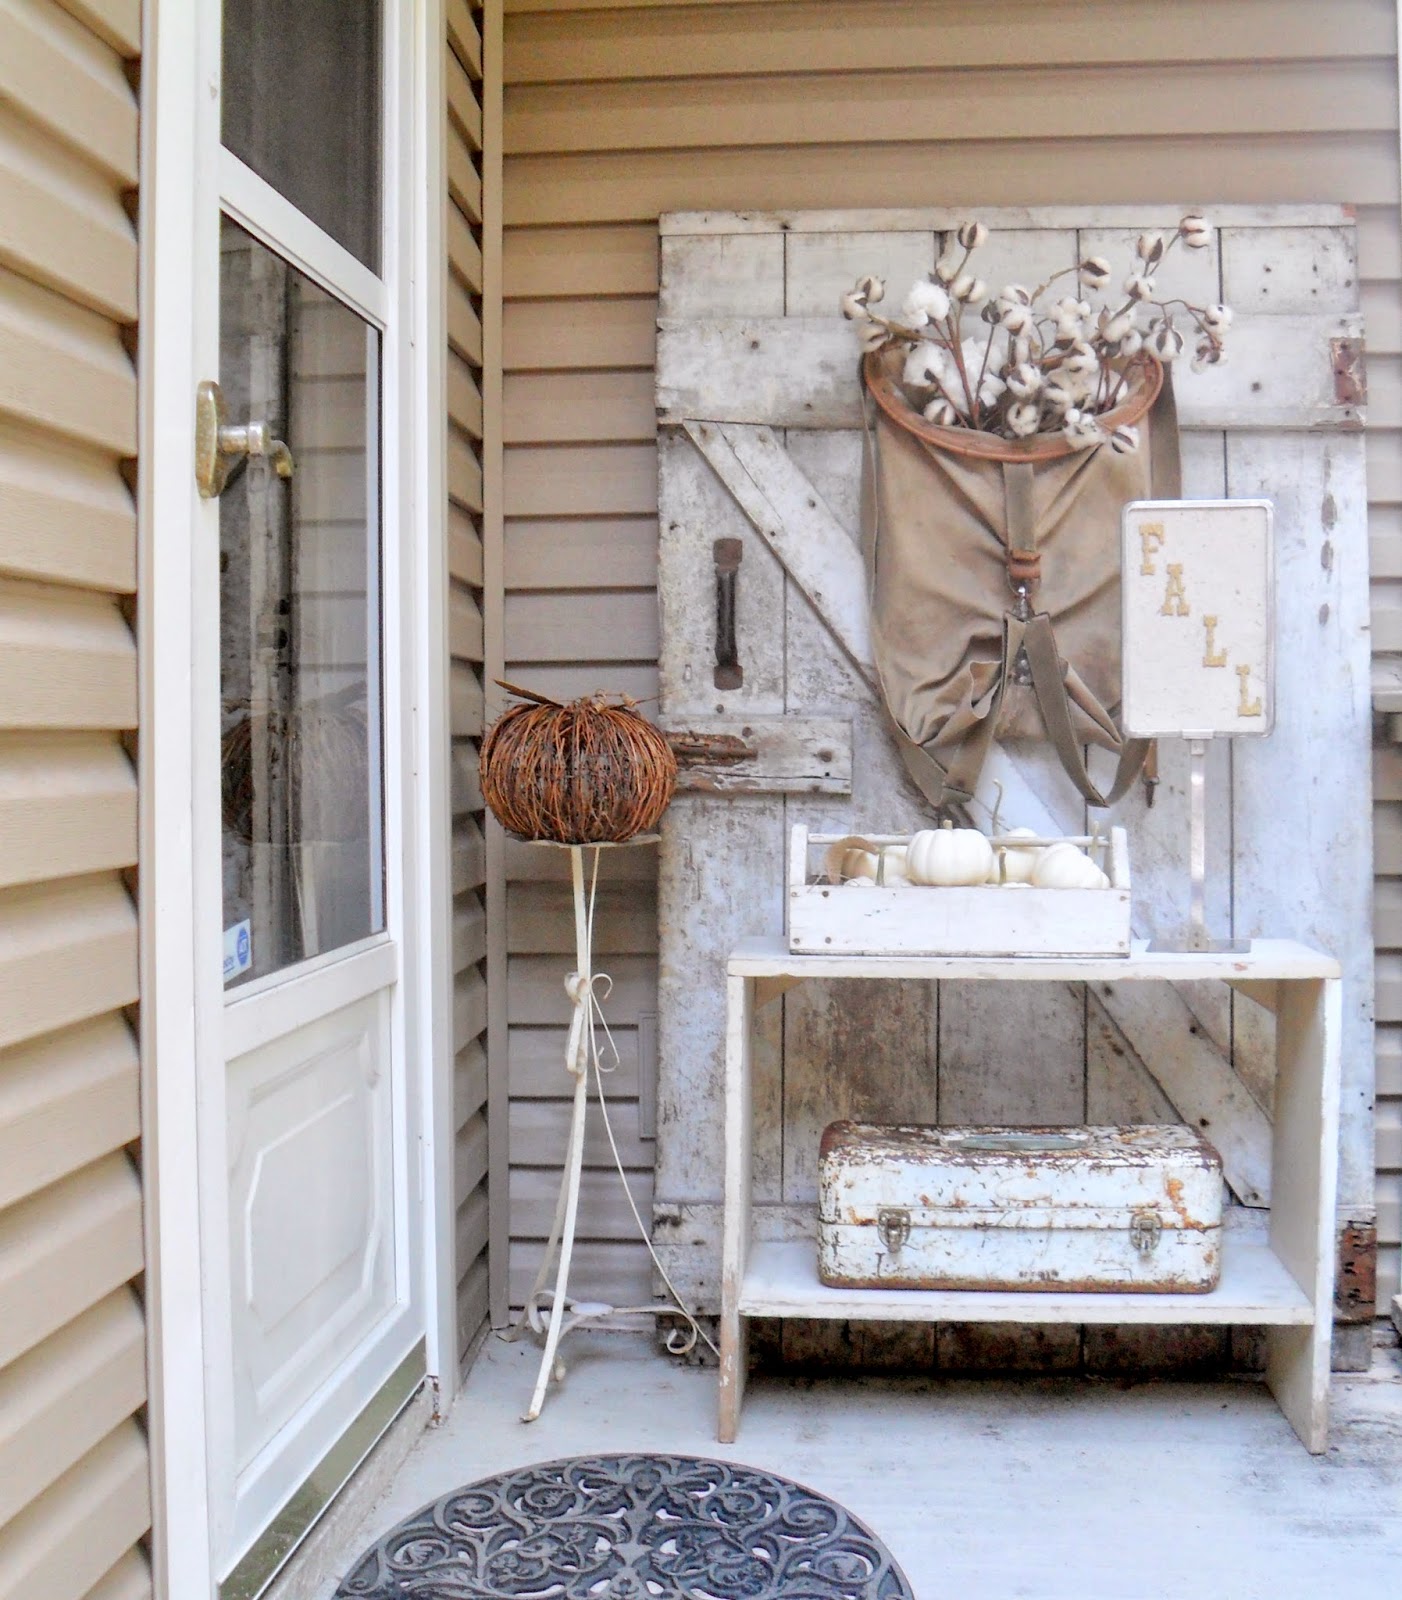 must love junk: My Back Stoop and Favorite Country Living Find